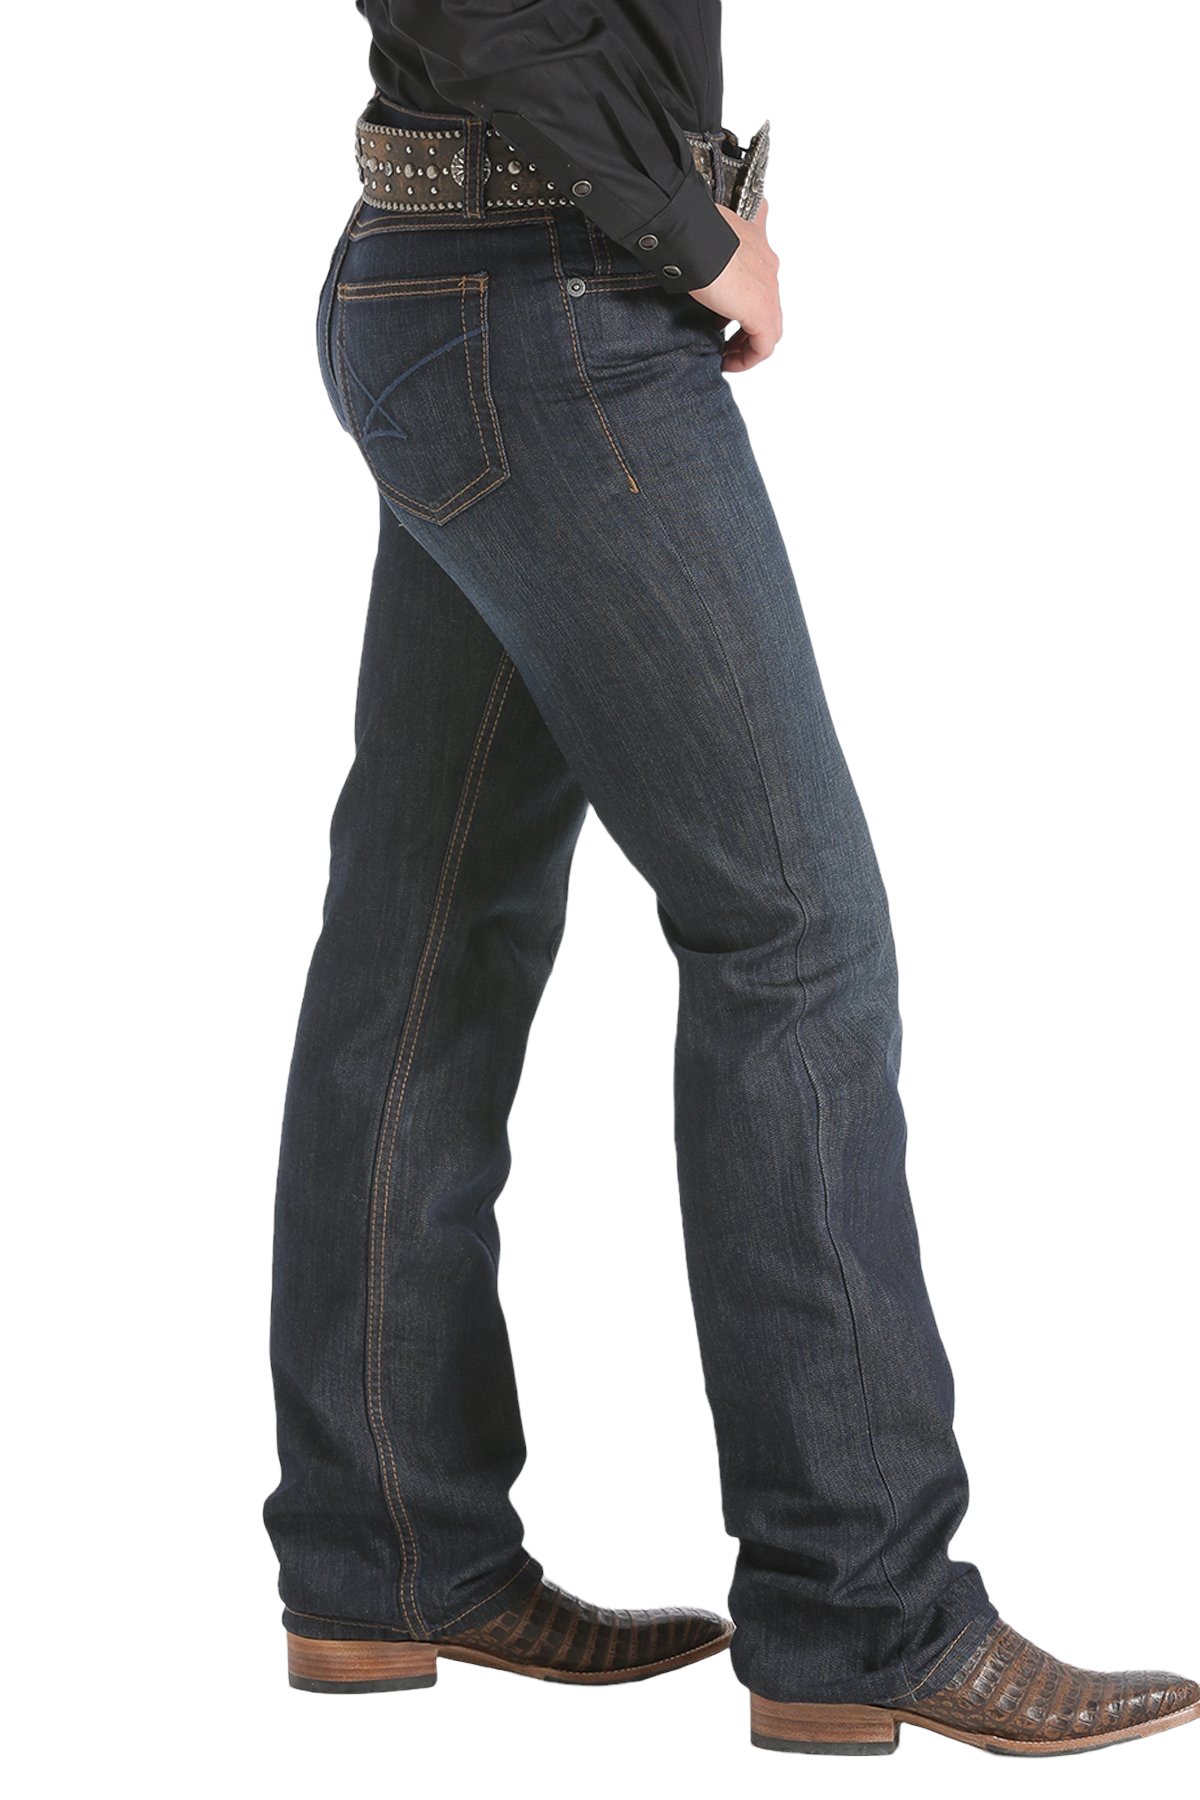 Jenna' Slim Fit Bootcut Jeans – Cutting Edge Country